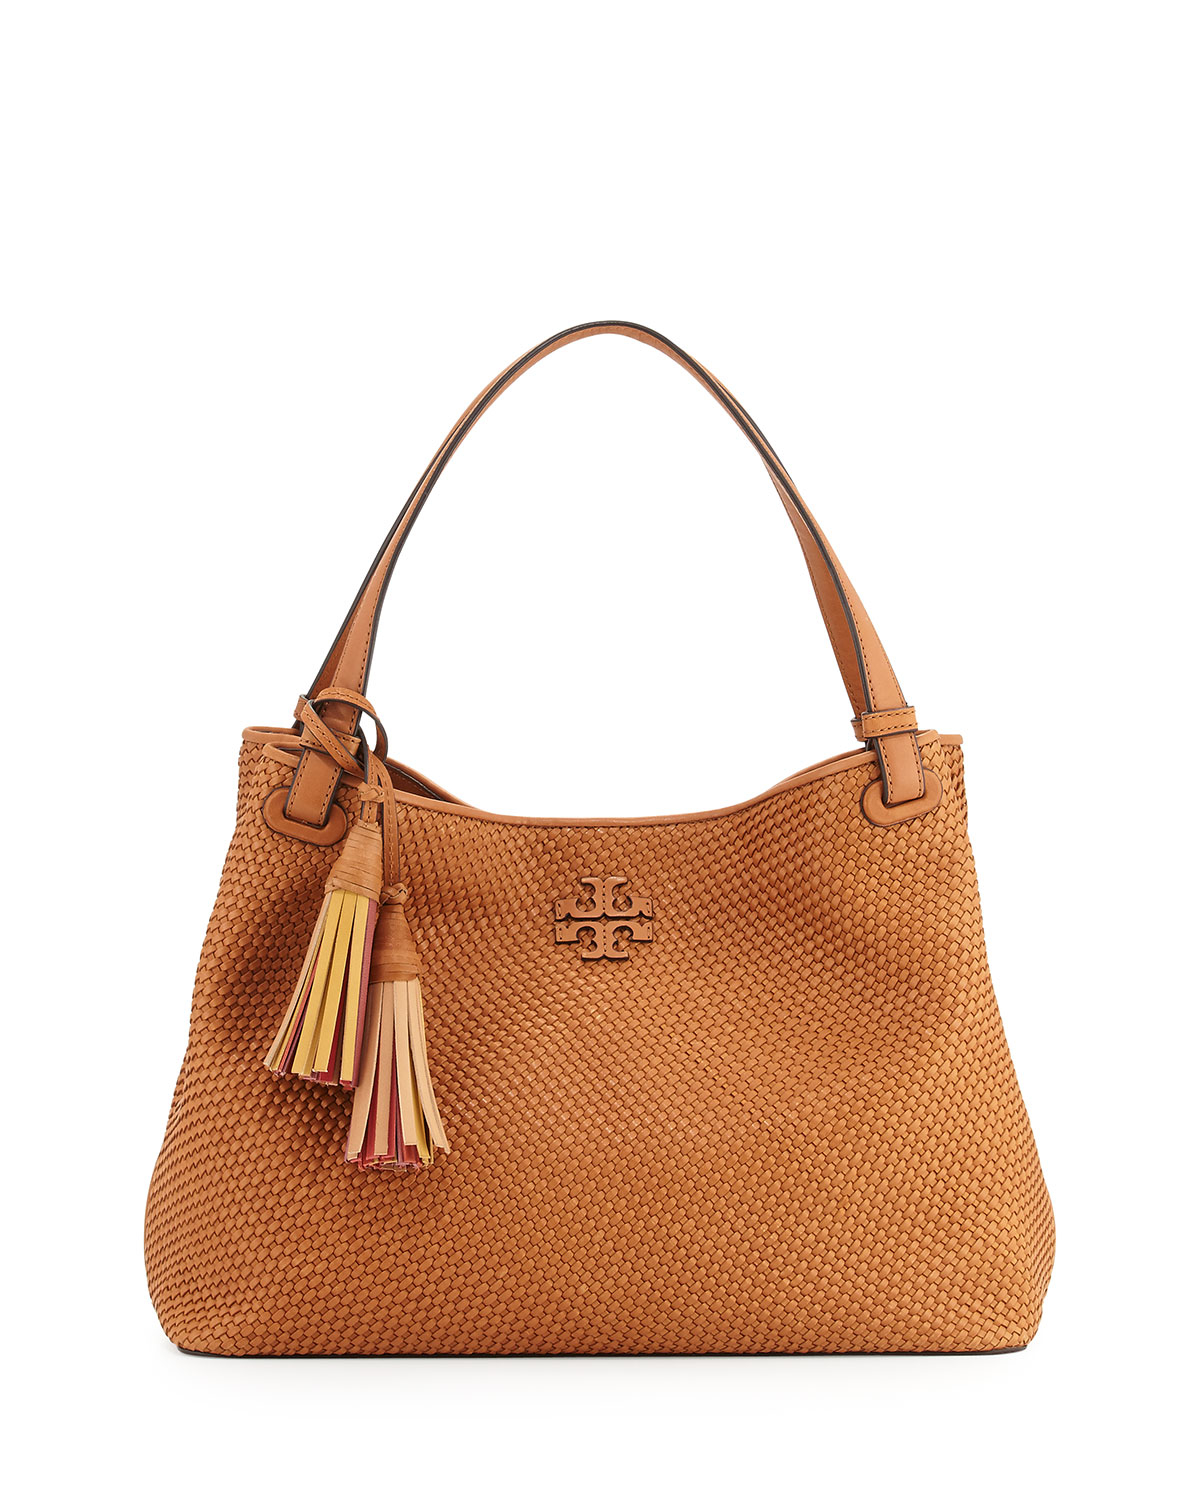 Tory Burch Thea Woven Leather Tote Bag in Brown - Lyst